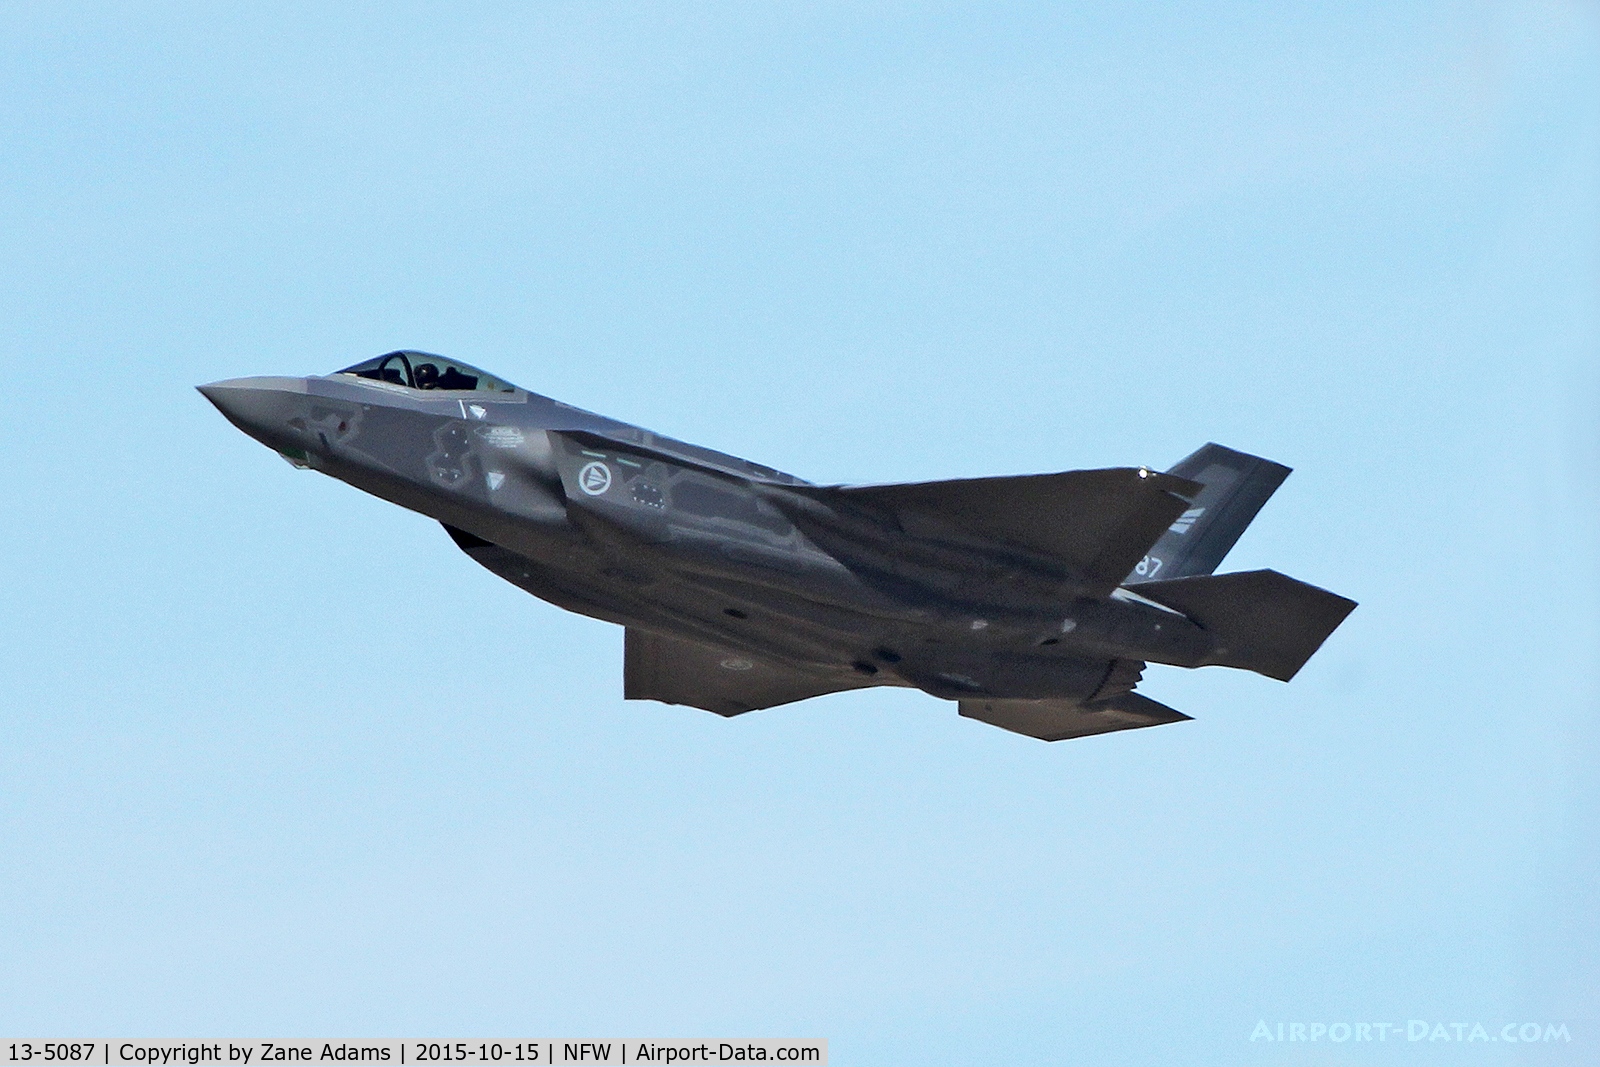 13-5087, 2013 Lockheed F-35A Lightning II C/N AM-01, Norway's first F-35   - Departing Navy Fort Worth